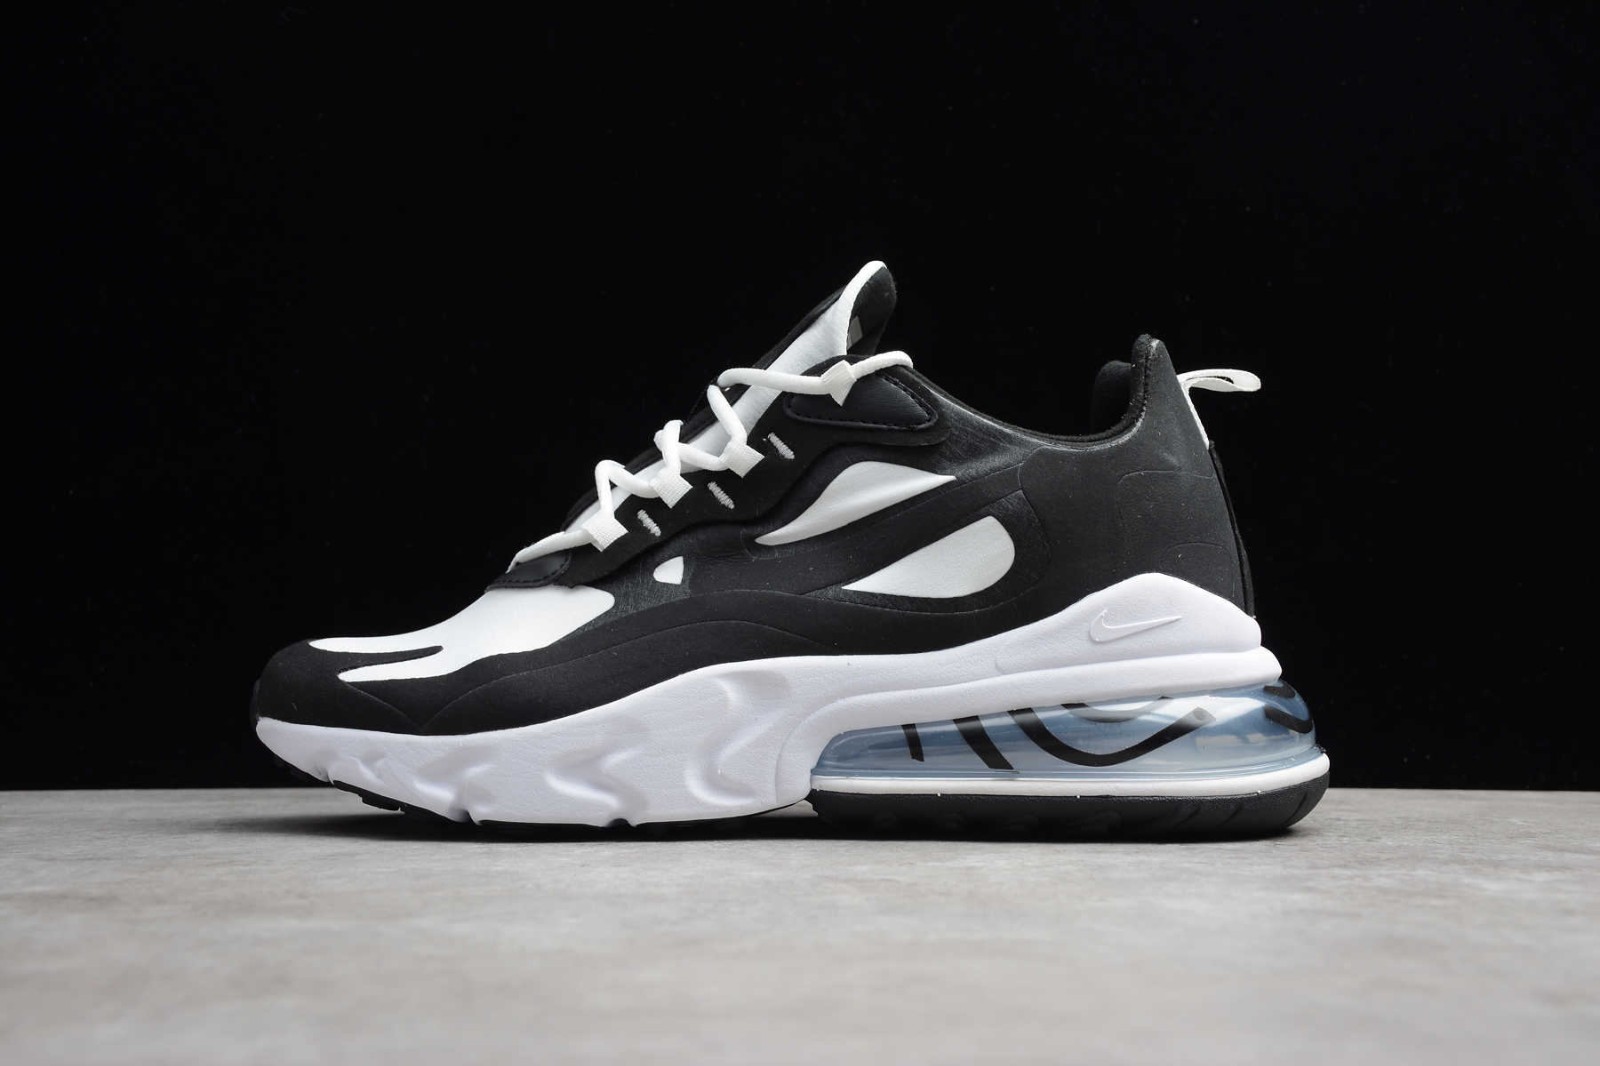 Nike Air Max 270 React Black White Casual Running AO4971 - MultiscaleconsultingShops - Nike's Shox Enigma Arrives in All-White With Accents